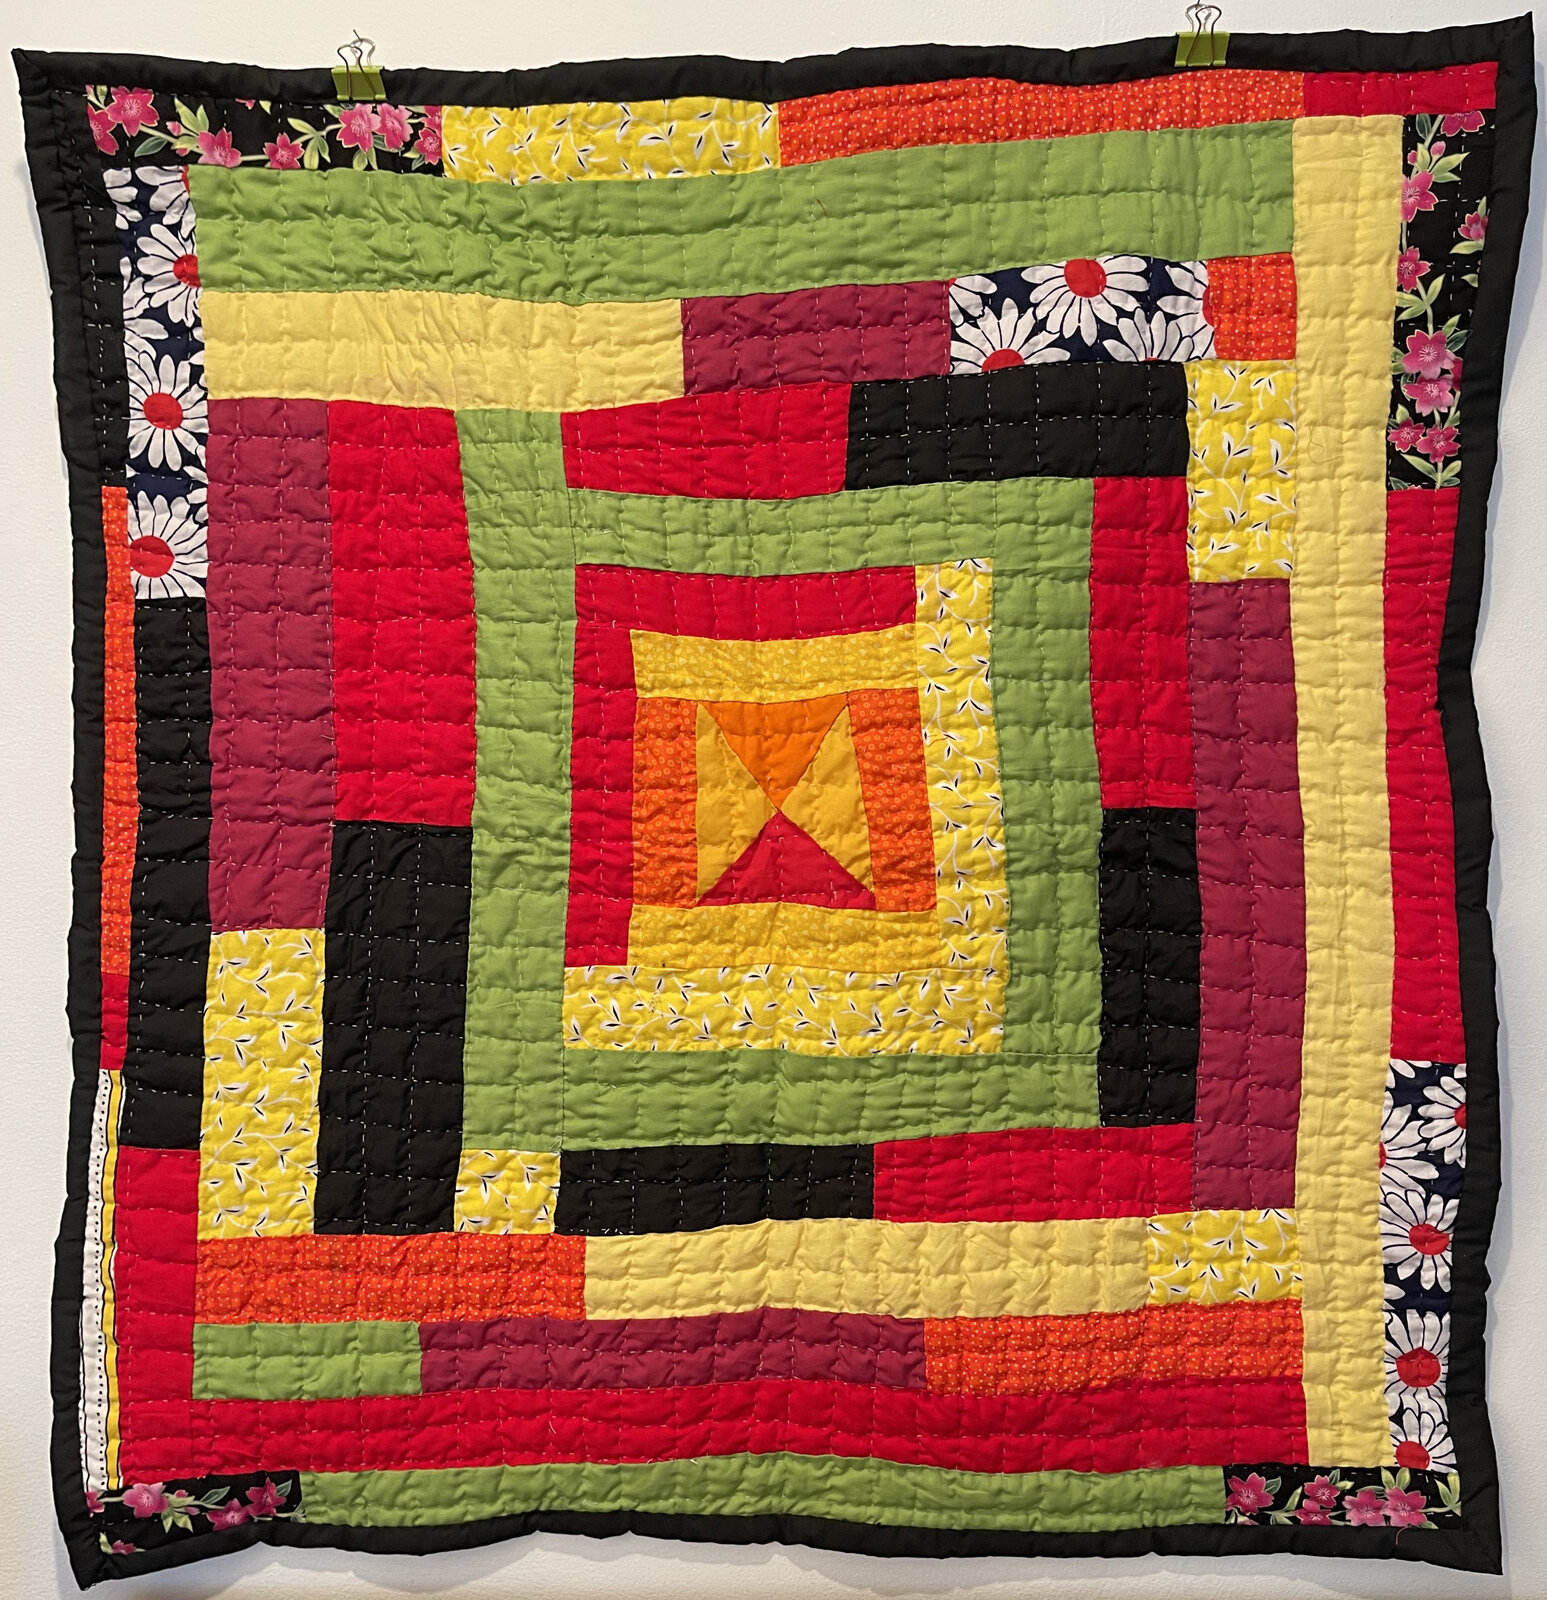   Kristin Pettway, Gee’s Bend, AL    Housetop variation quilt/wall-hanging   2020  41.5" x 40"  Cotton fabrics  Hand-pieced, hand-quilted    ASK ABOUT THIS QUILT   